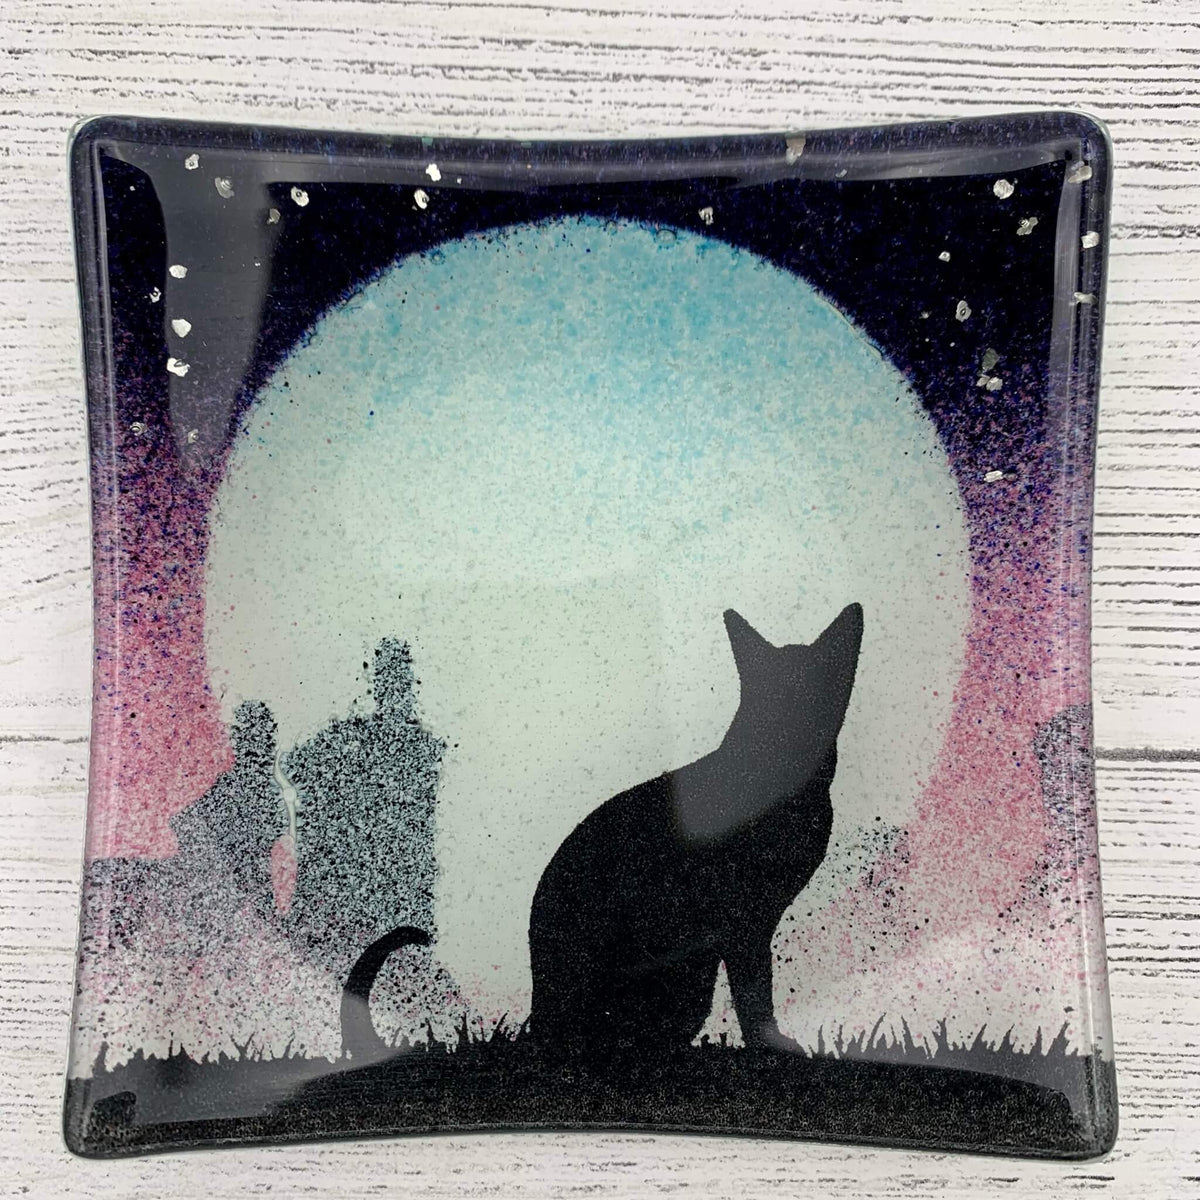 Handmade pink fused glass jewellery and trinket dish, featuring a cat silhouette, with a big moon behind and sprinkles of glitter for stars. 